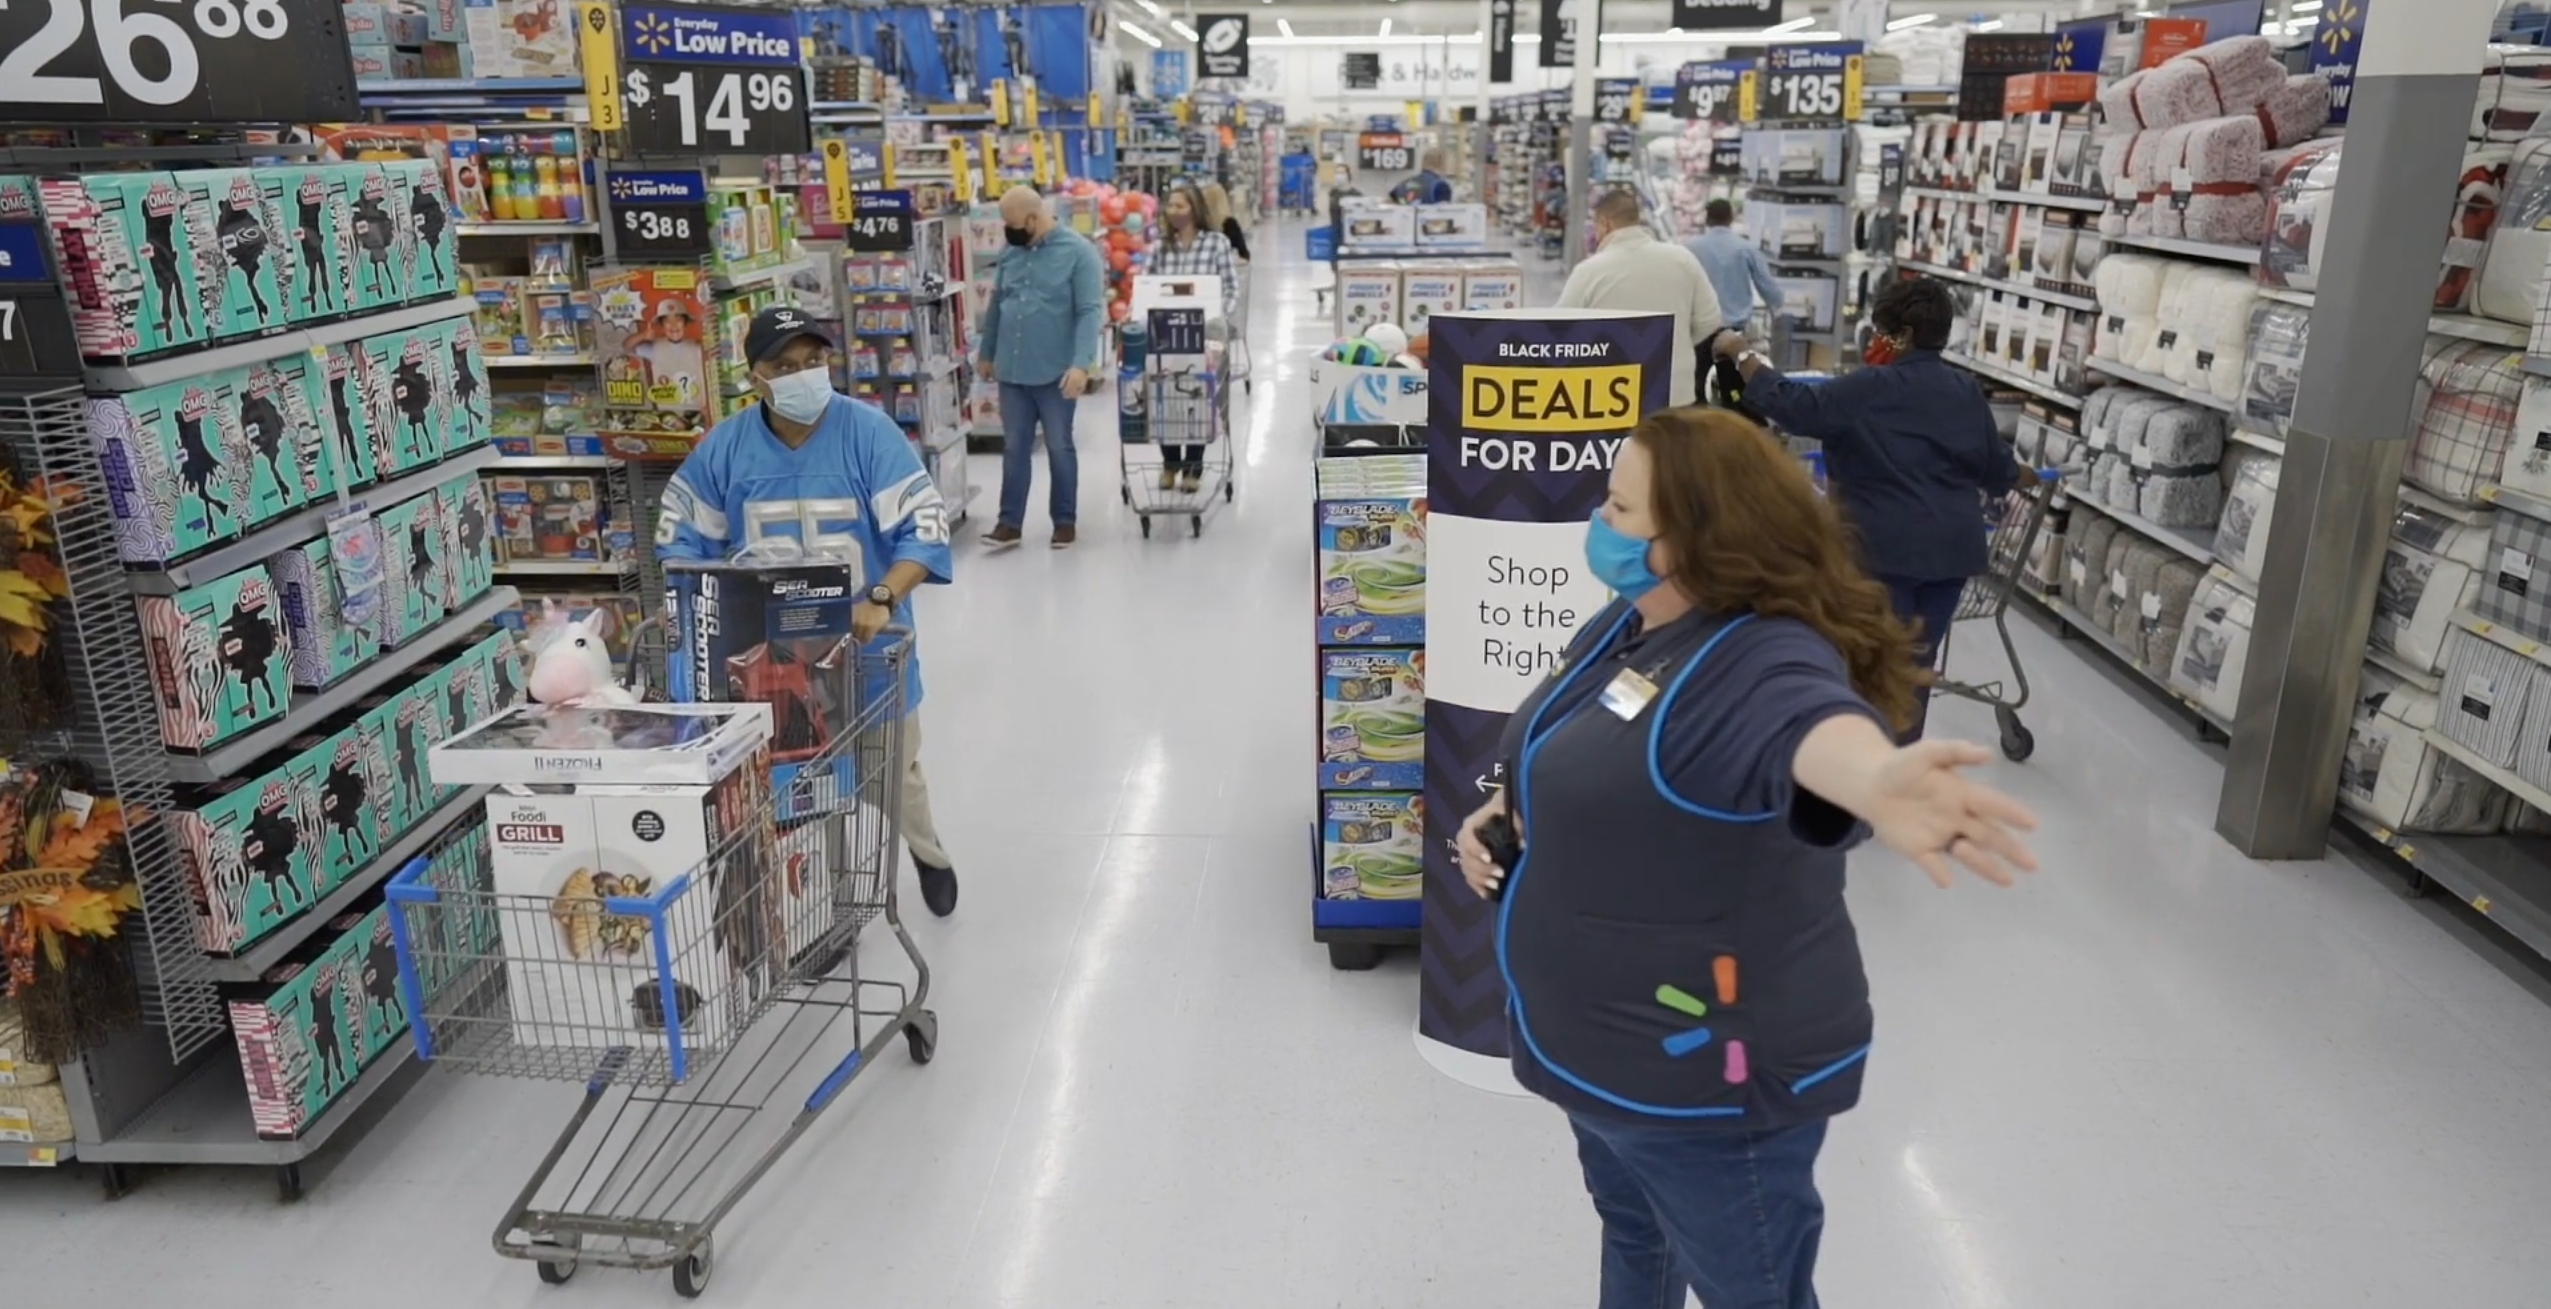 Walmart Announced Its Black Friday Plans With Deals All November